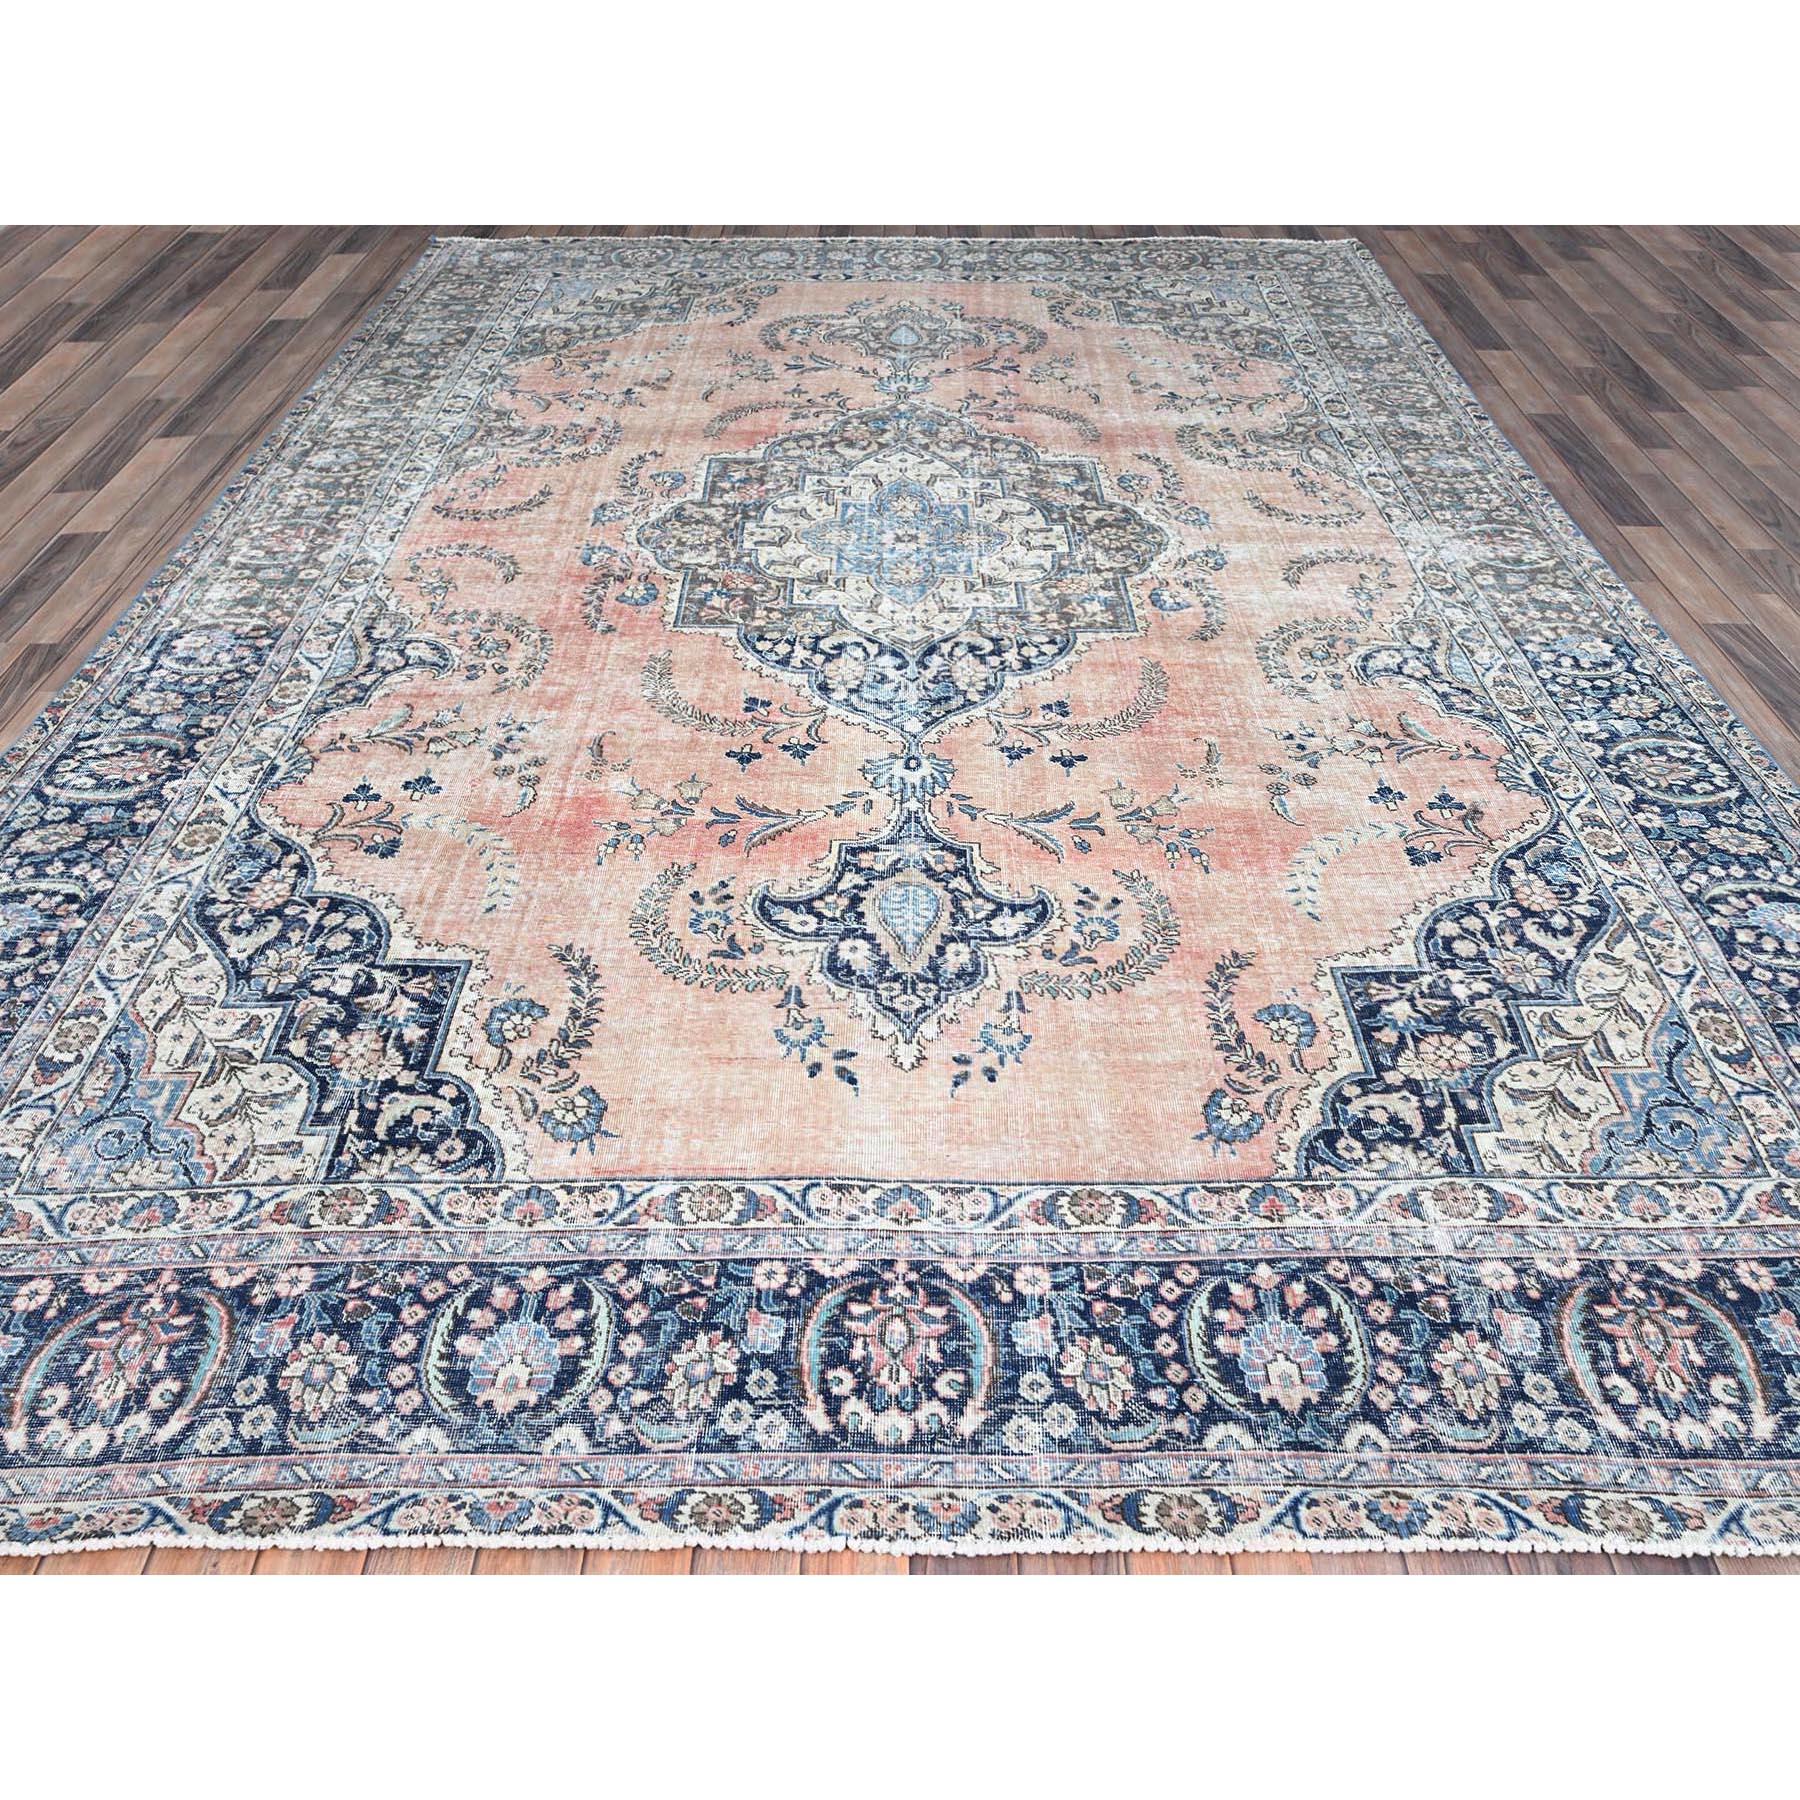 Medieval Brown Wool Hand Knotted Vintage Persian Tabriz Clean Evenly Worn Distressed Rug For Sale